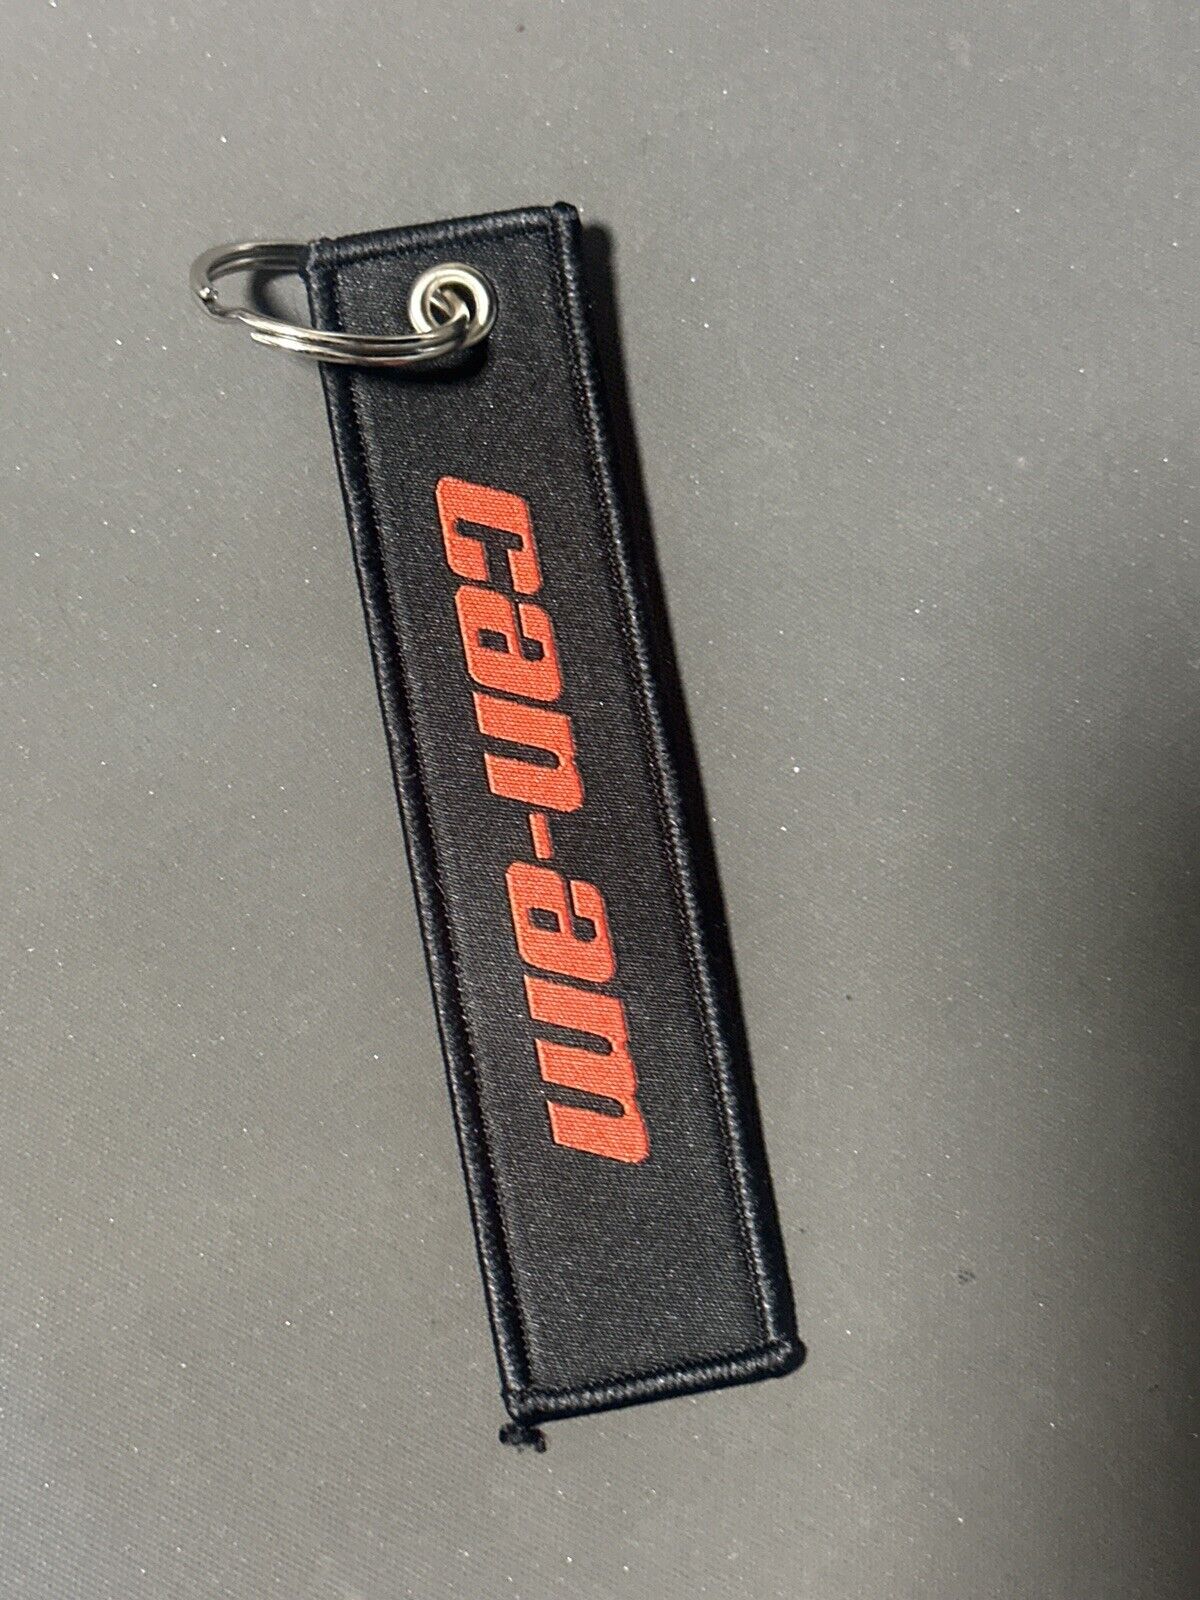 Can Am X3 key tags with rings Lanyard